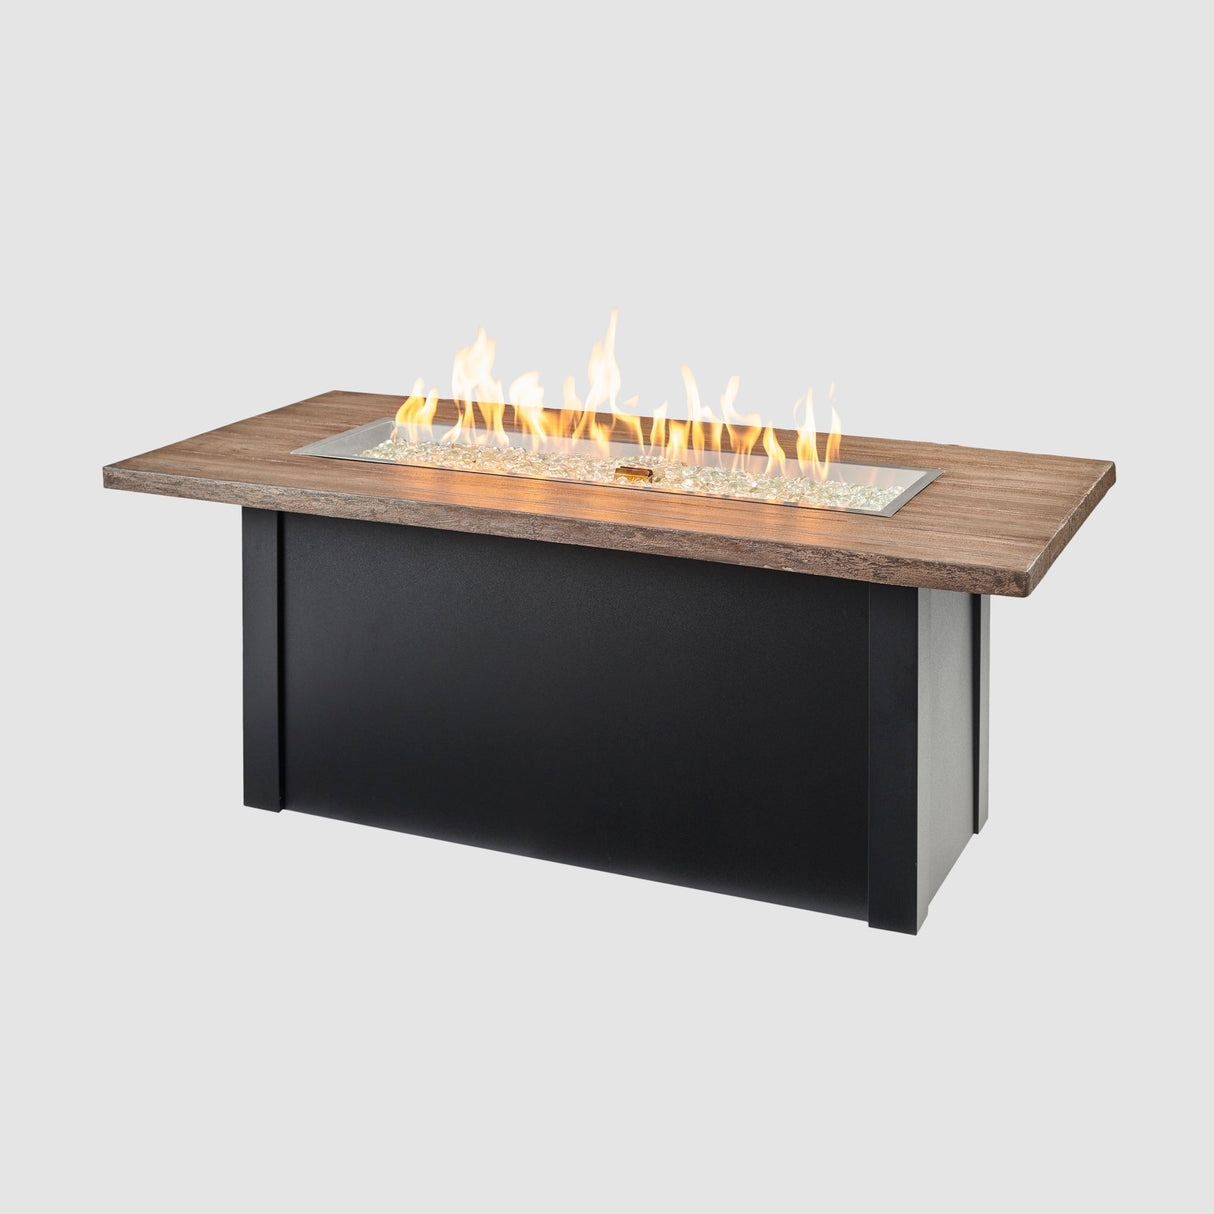 Havenwood Linear Gas Fire Pit Table with a Driftwood top and Luverne Black base on a grey background